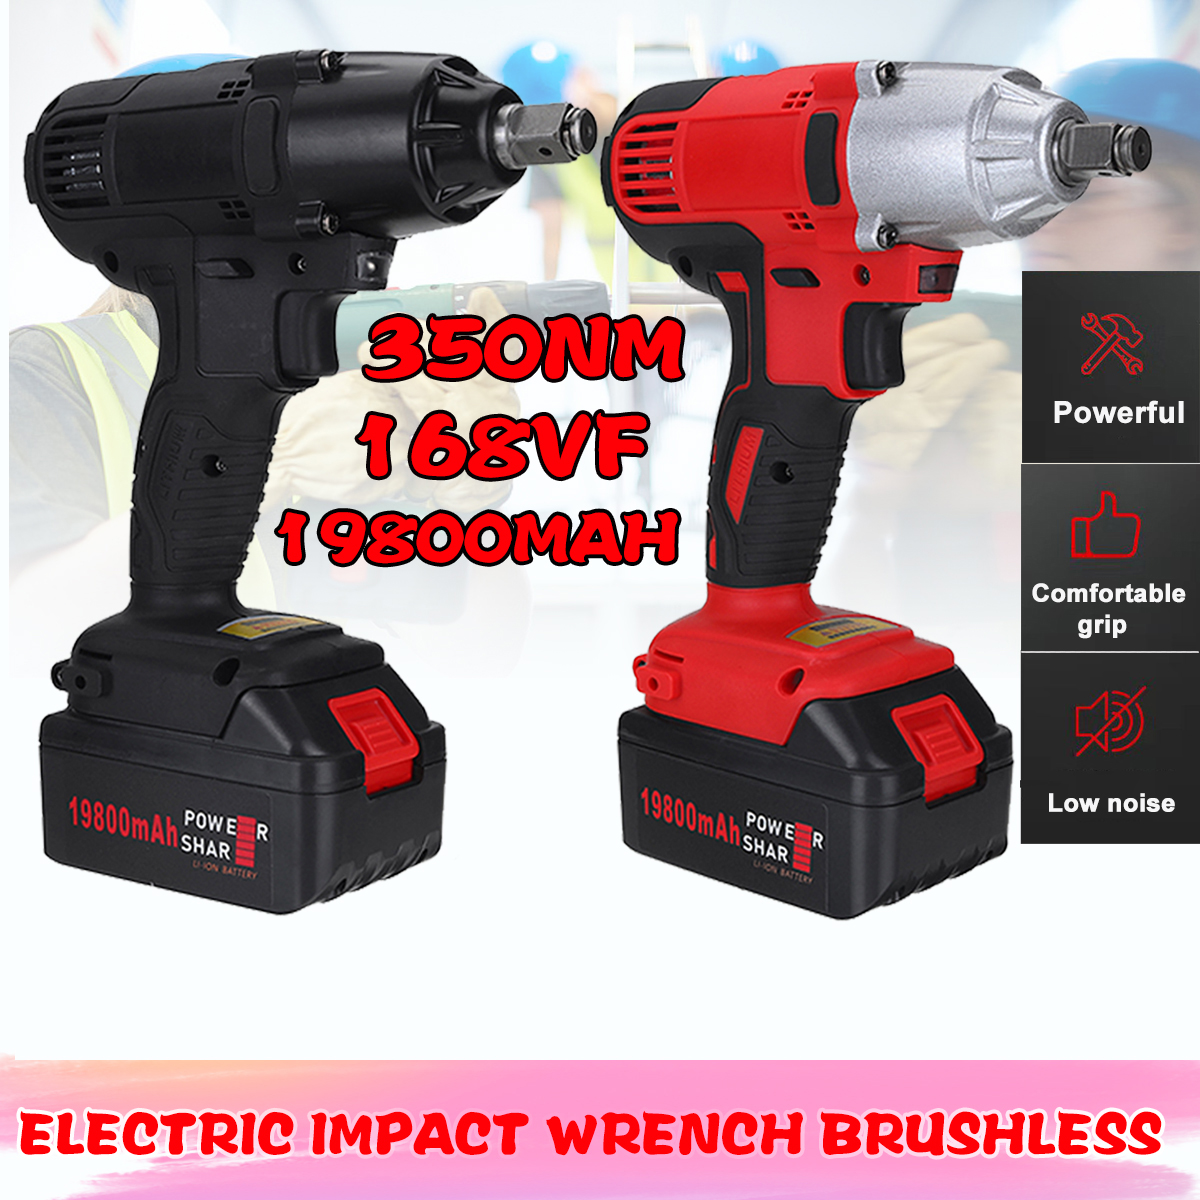 DOERSUPP Electric Impact Wrench Brushless Electric Wrench 19800mAh 350 Torque Crodless Lithium Battery Power Tool Socket Wrench